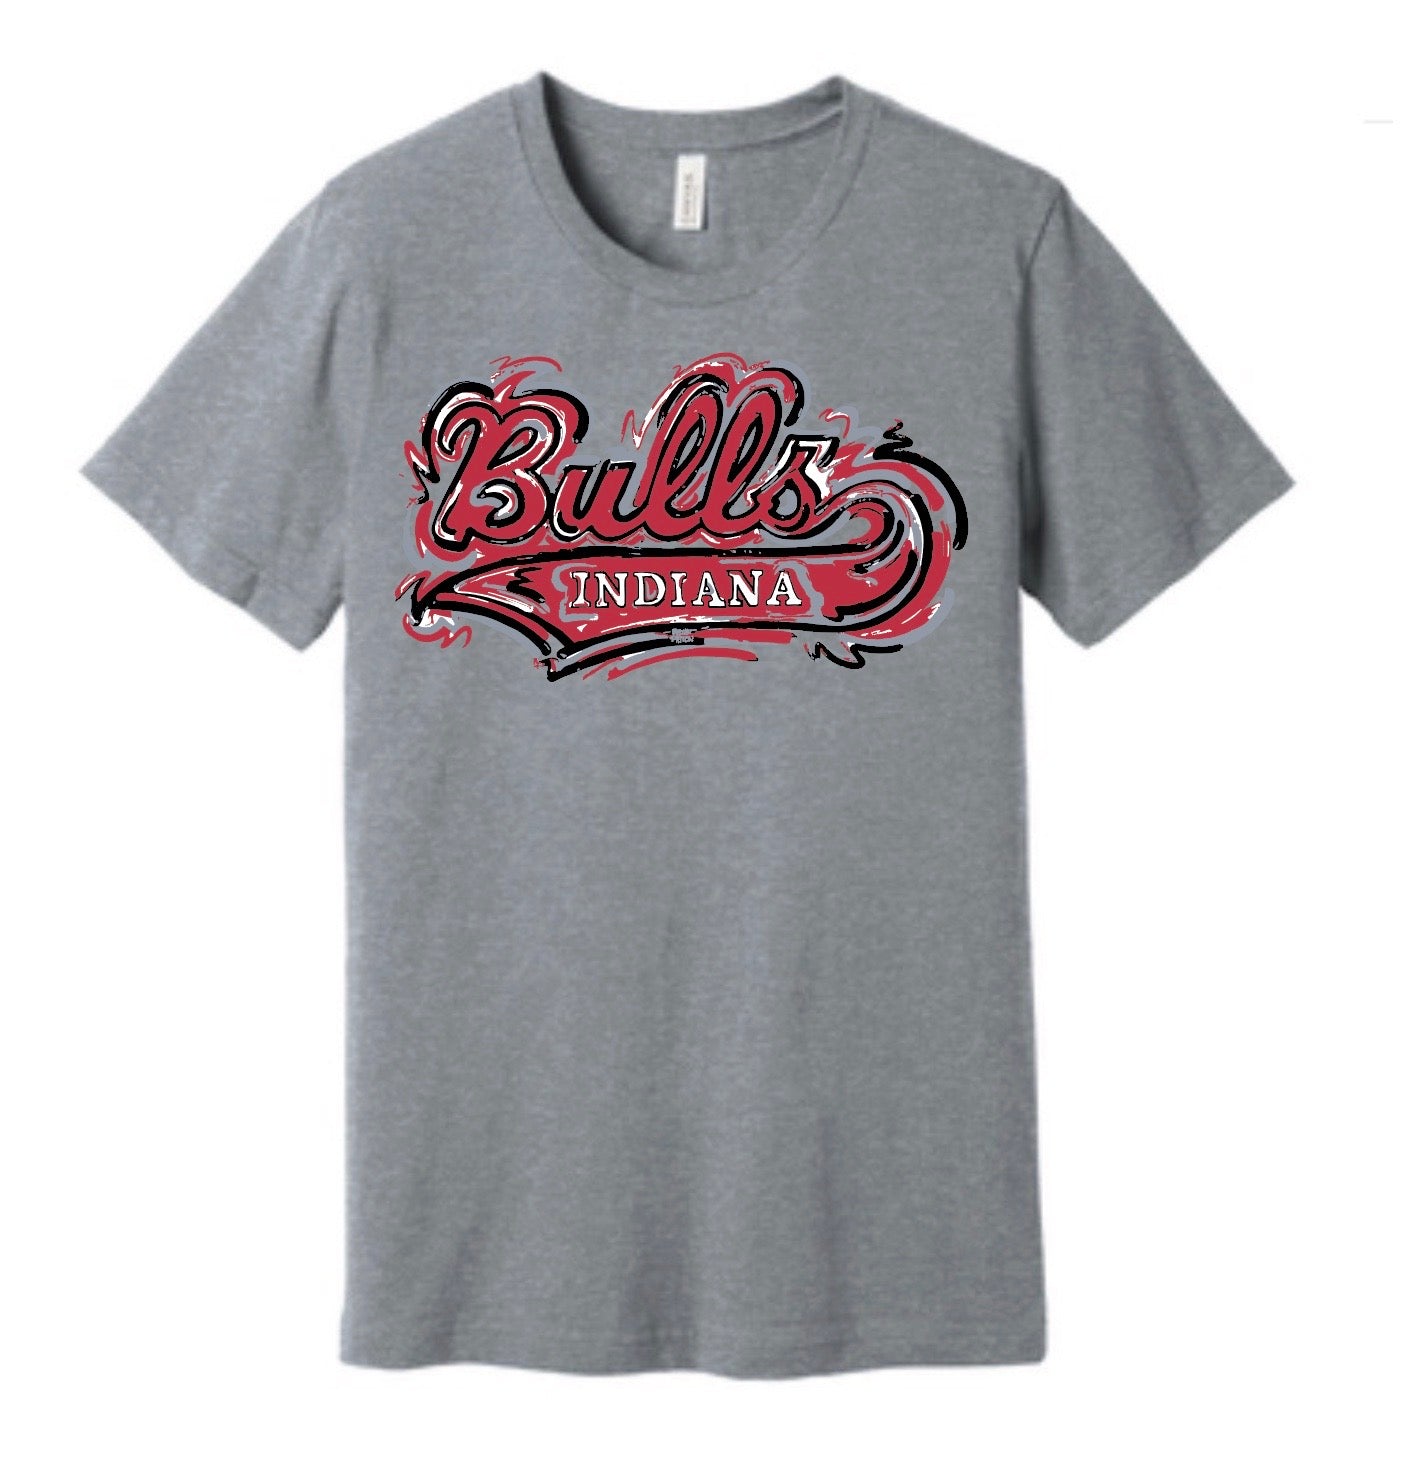 Indiana Bulls Unisex Tee by Justin Patten (3 Colors)